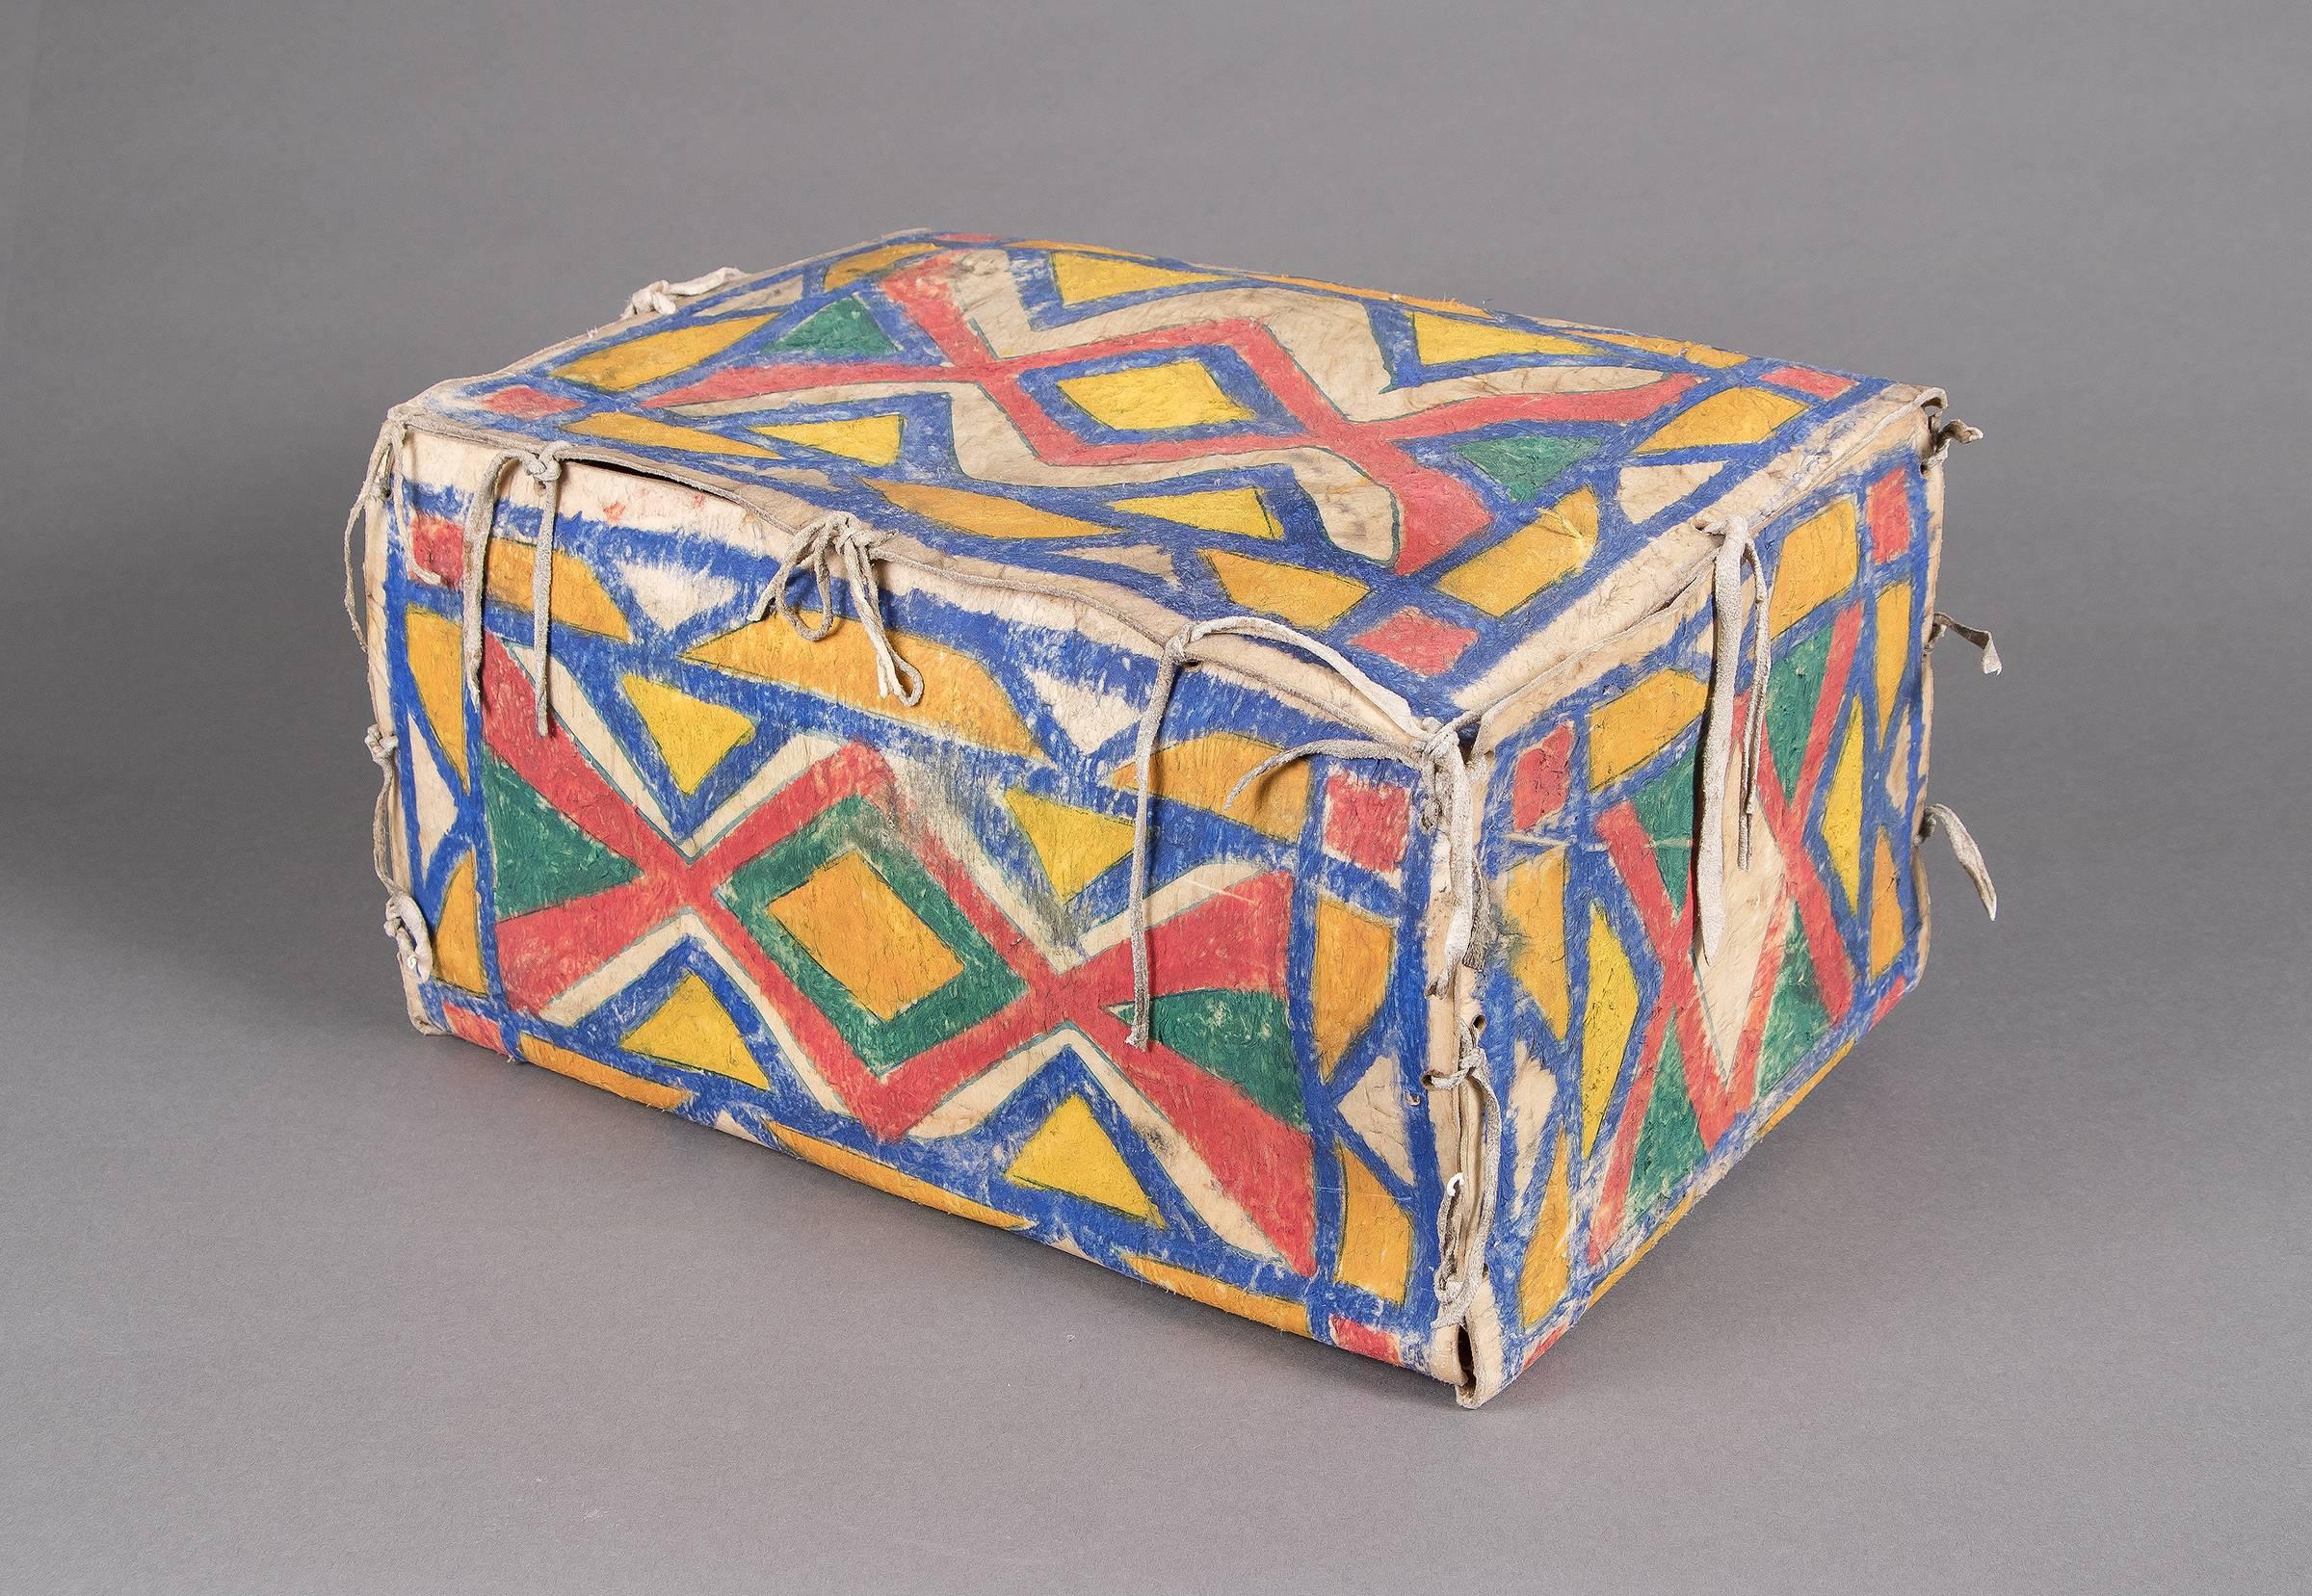 An antique Sioux (Plains Indian) parfleche container in a box form. Constructed of rawhide and painted with natural pigments (vegetal paints) in abstract geometric designs. A Nomadic tribe, the Sioux are associated with areas of the great plains of